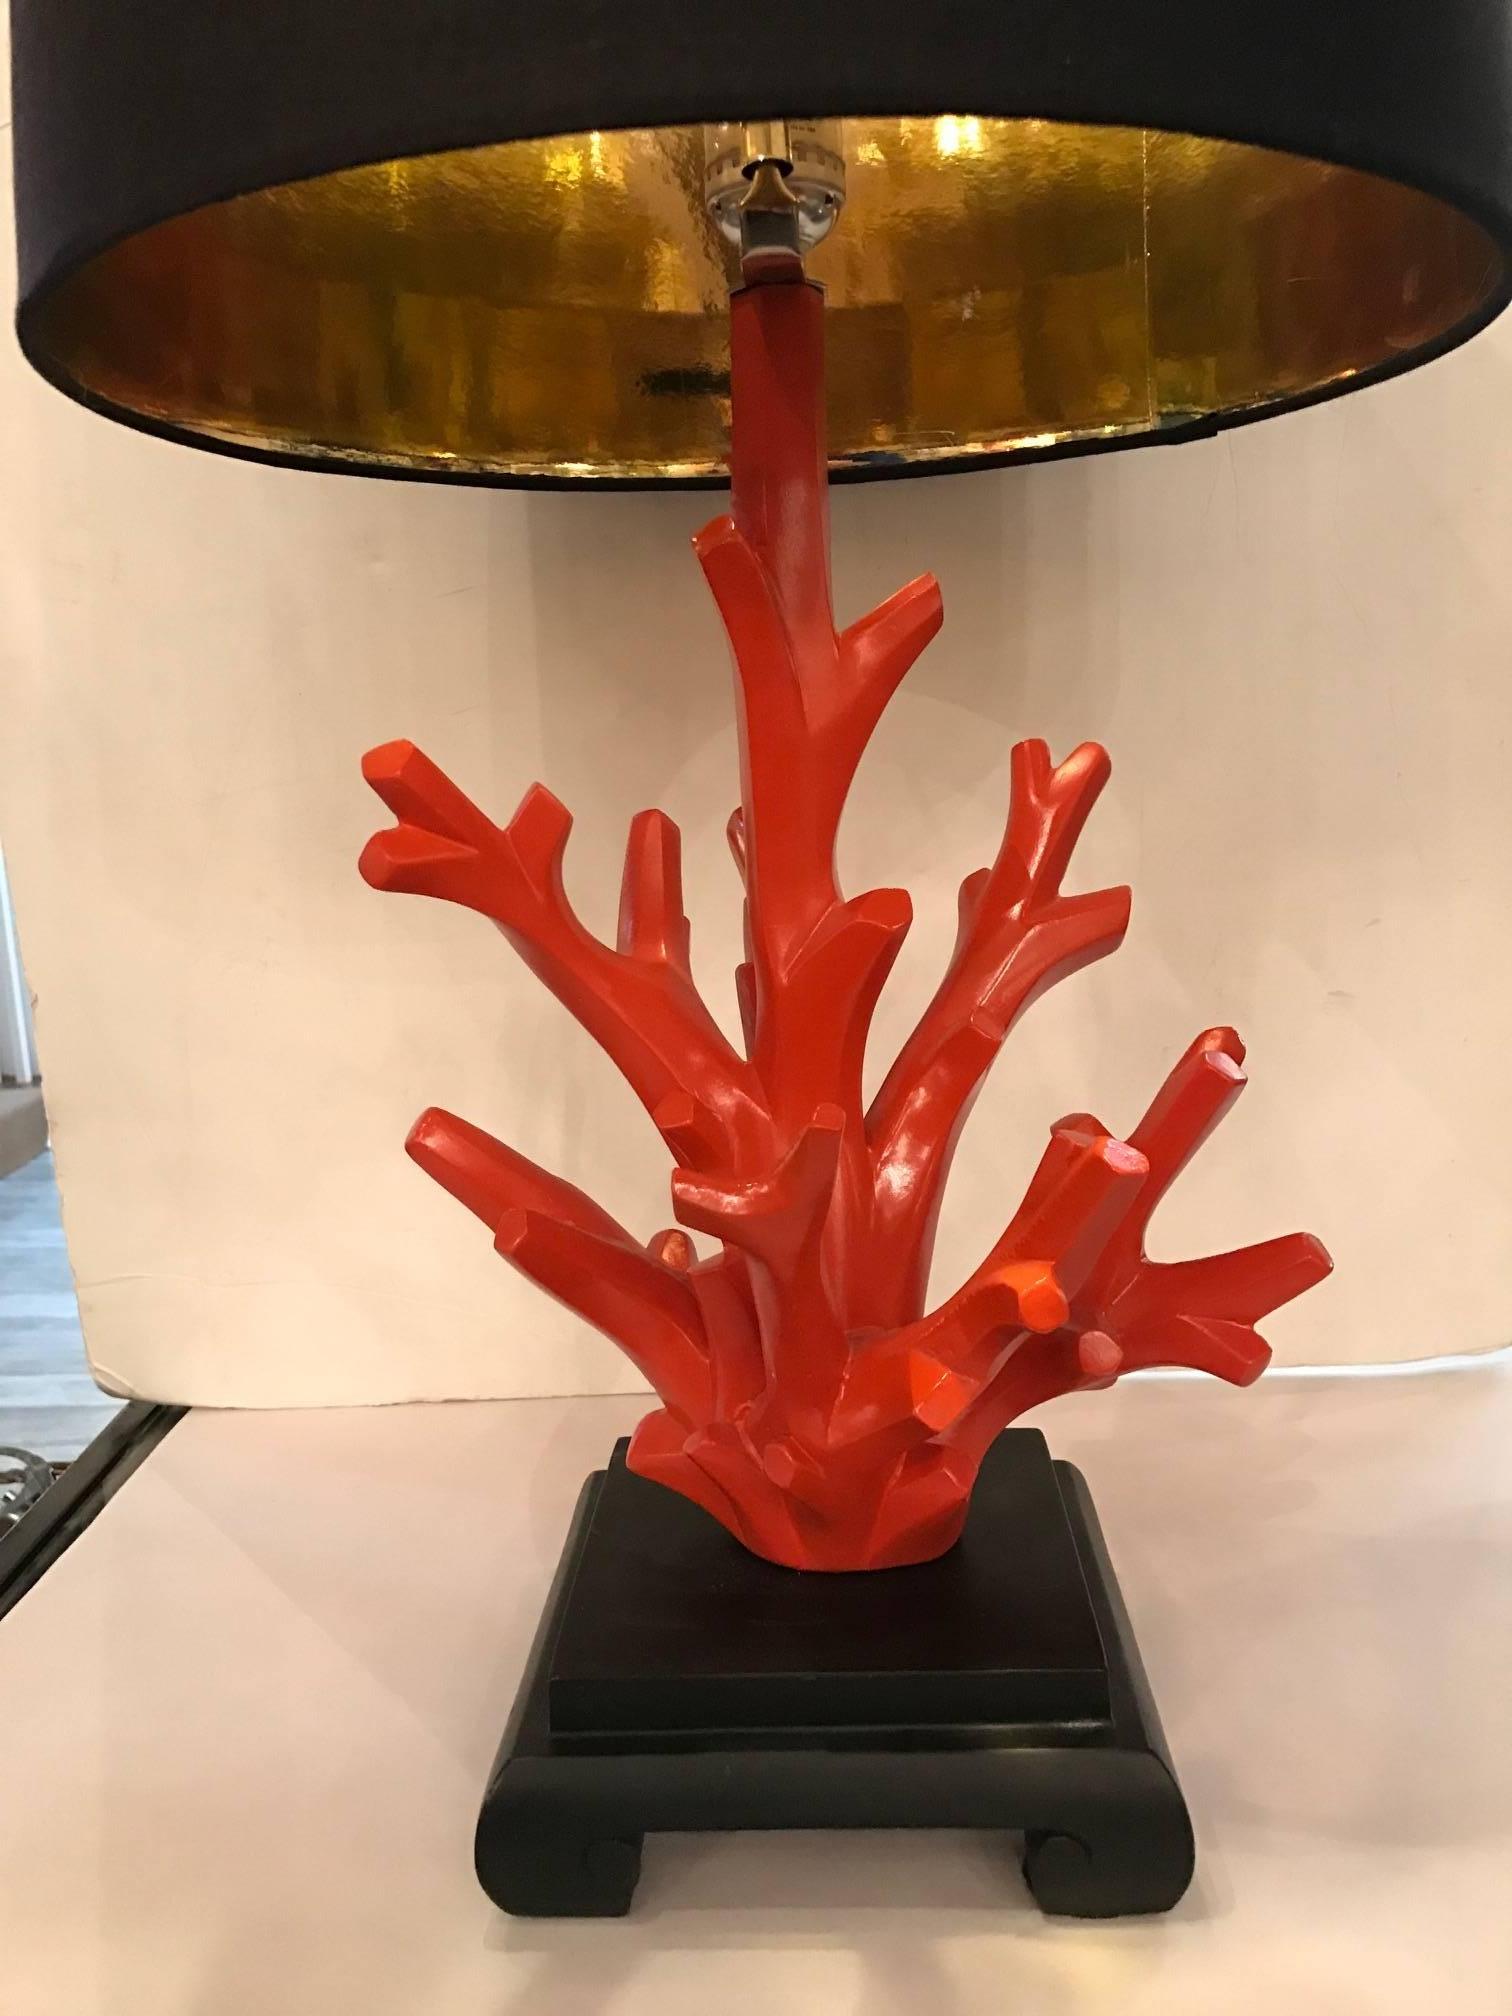 The lacquered orange red on a black Asian Style base topped with black foil lined shades. The finial is a match to the coral bodies. The bases measure 7 inches square.